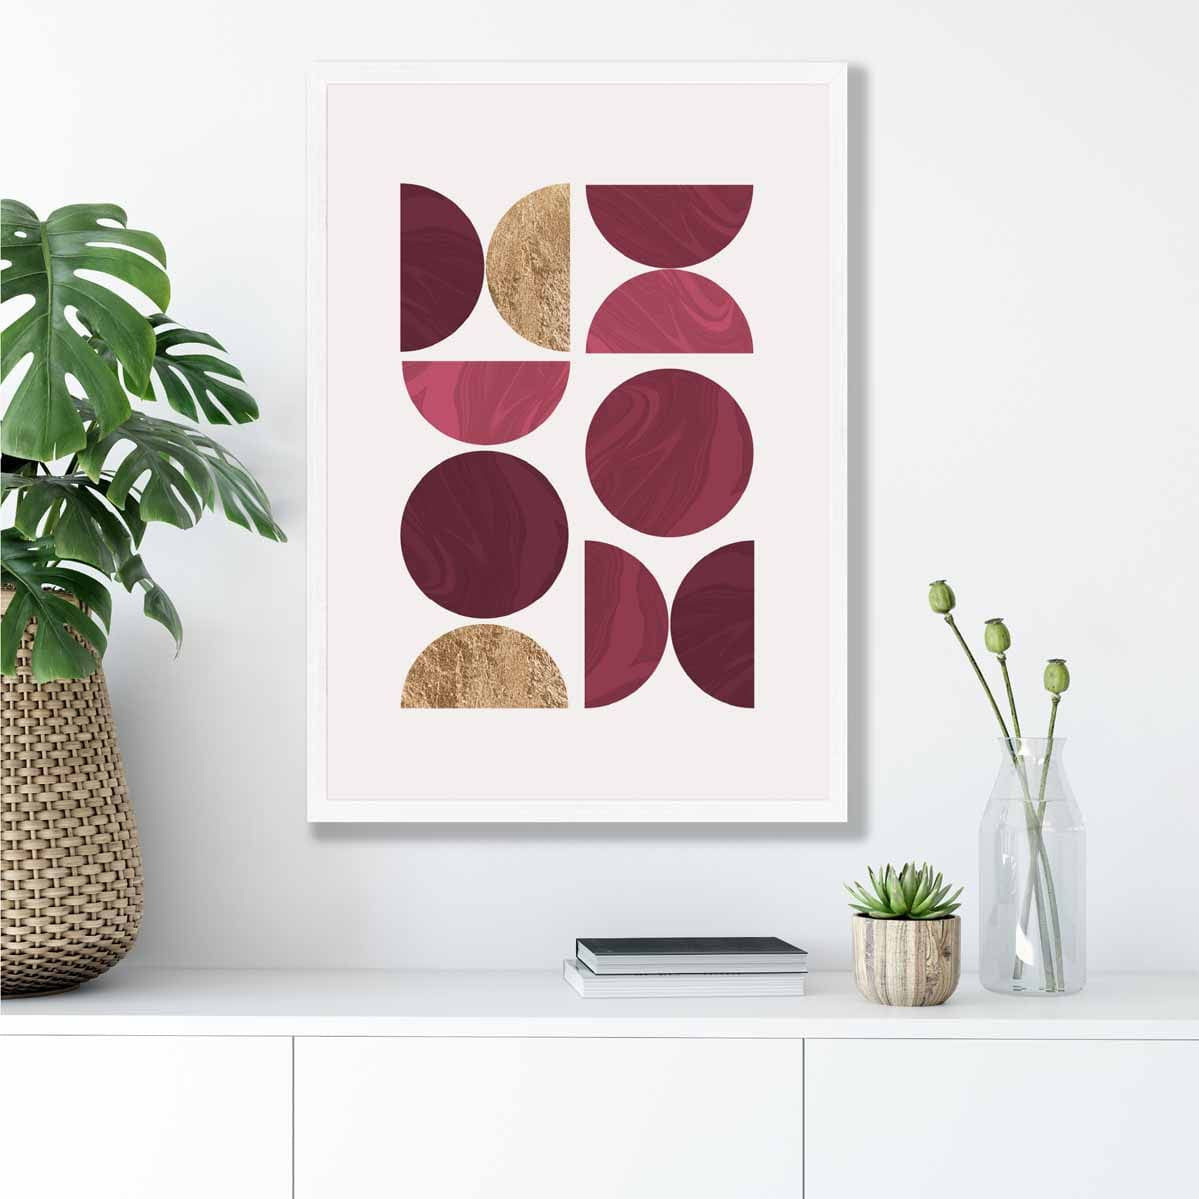 Mid Century Modern Geometric Print No 1 in Damson Red and Gold